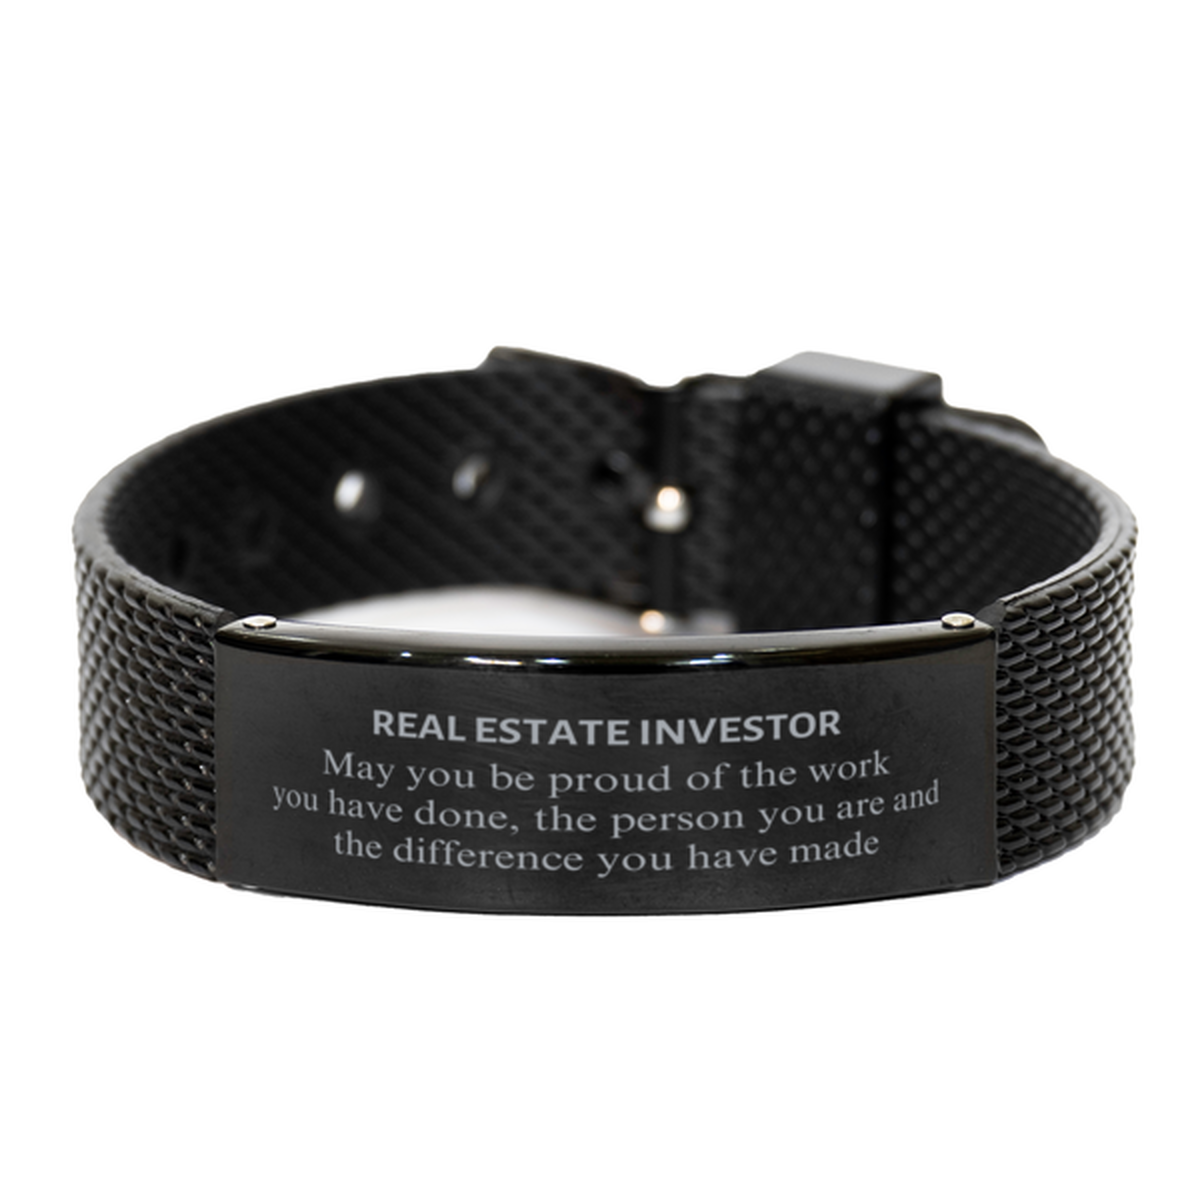 Real Estate Investor May you be proud of the work you have done, Retirement Real Estate Investor Black Shark Mesh Bracelet for Colleague Appreciation Gifts Amazing for Real Estate Investor